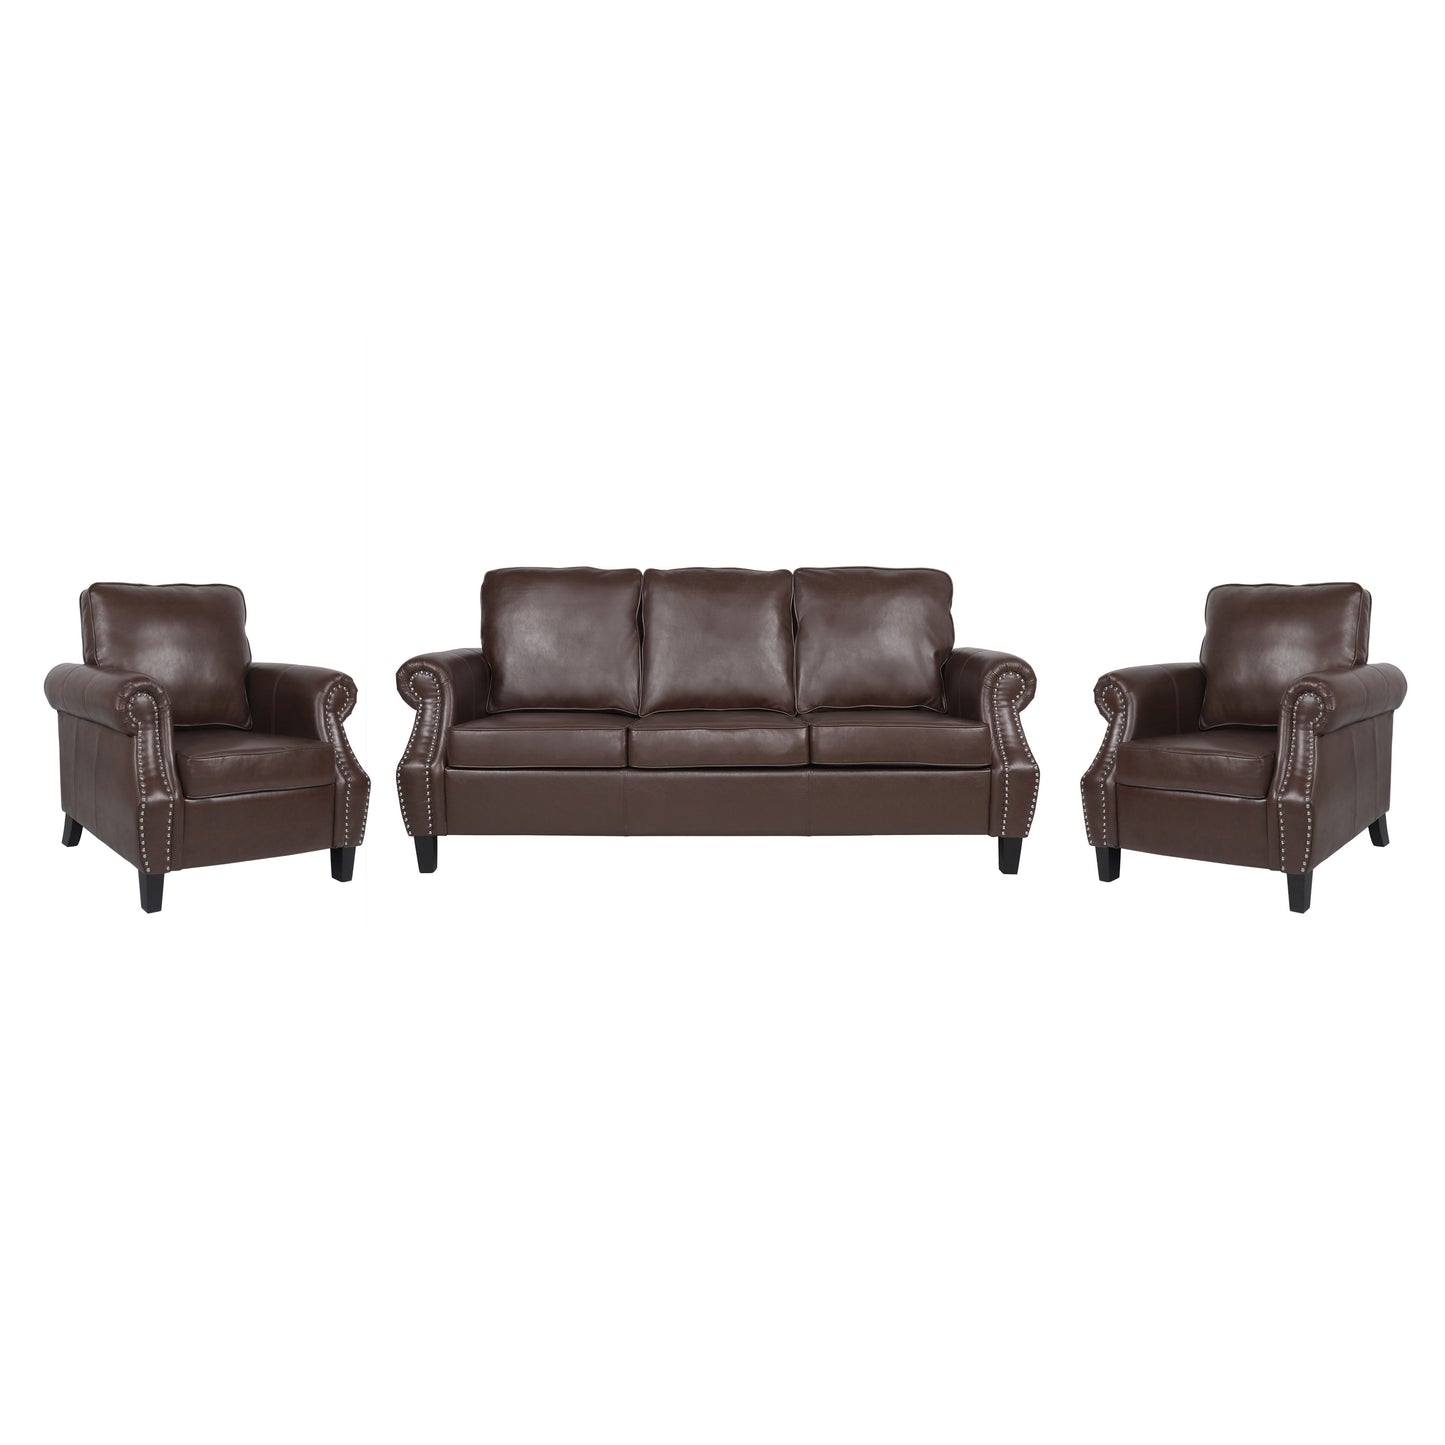 Burkehaven Contemporary Faux Leather 3 Piece Club Chair and Sofa Set